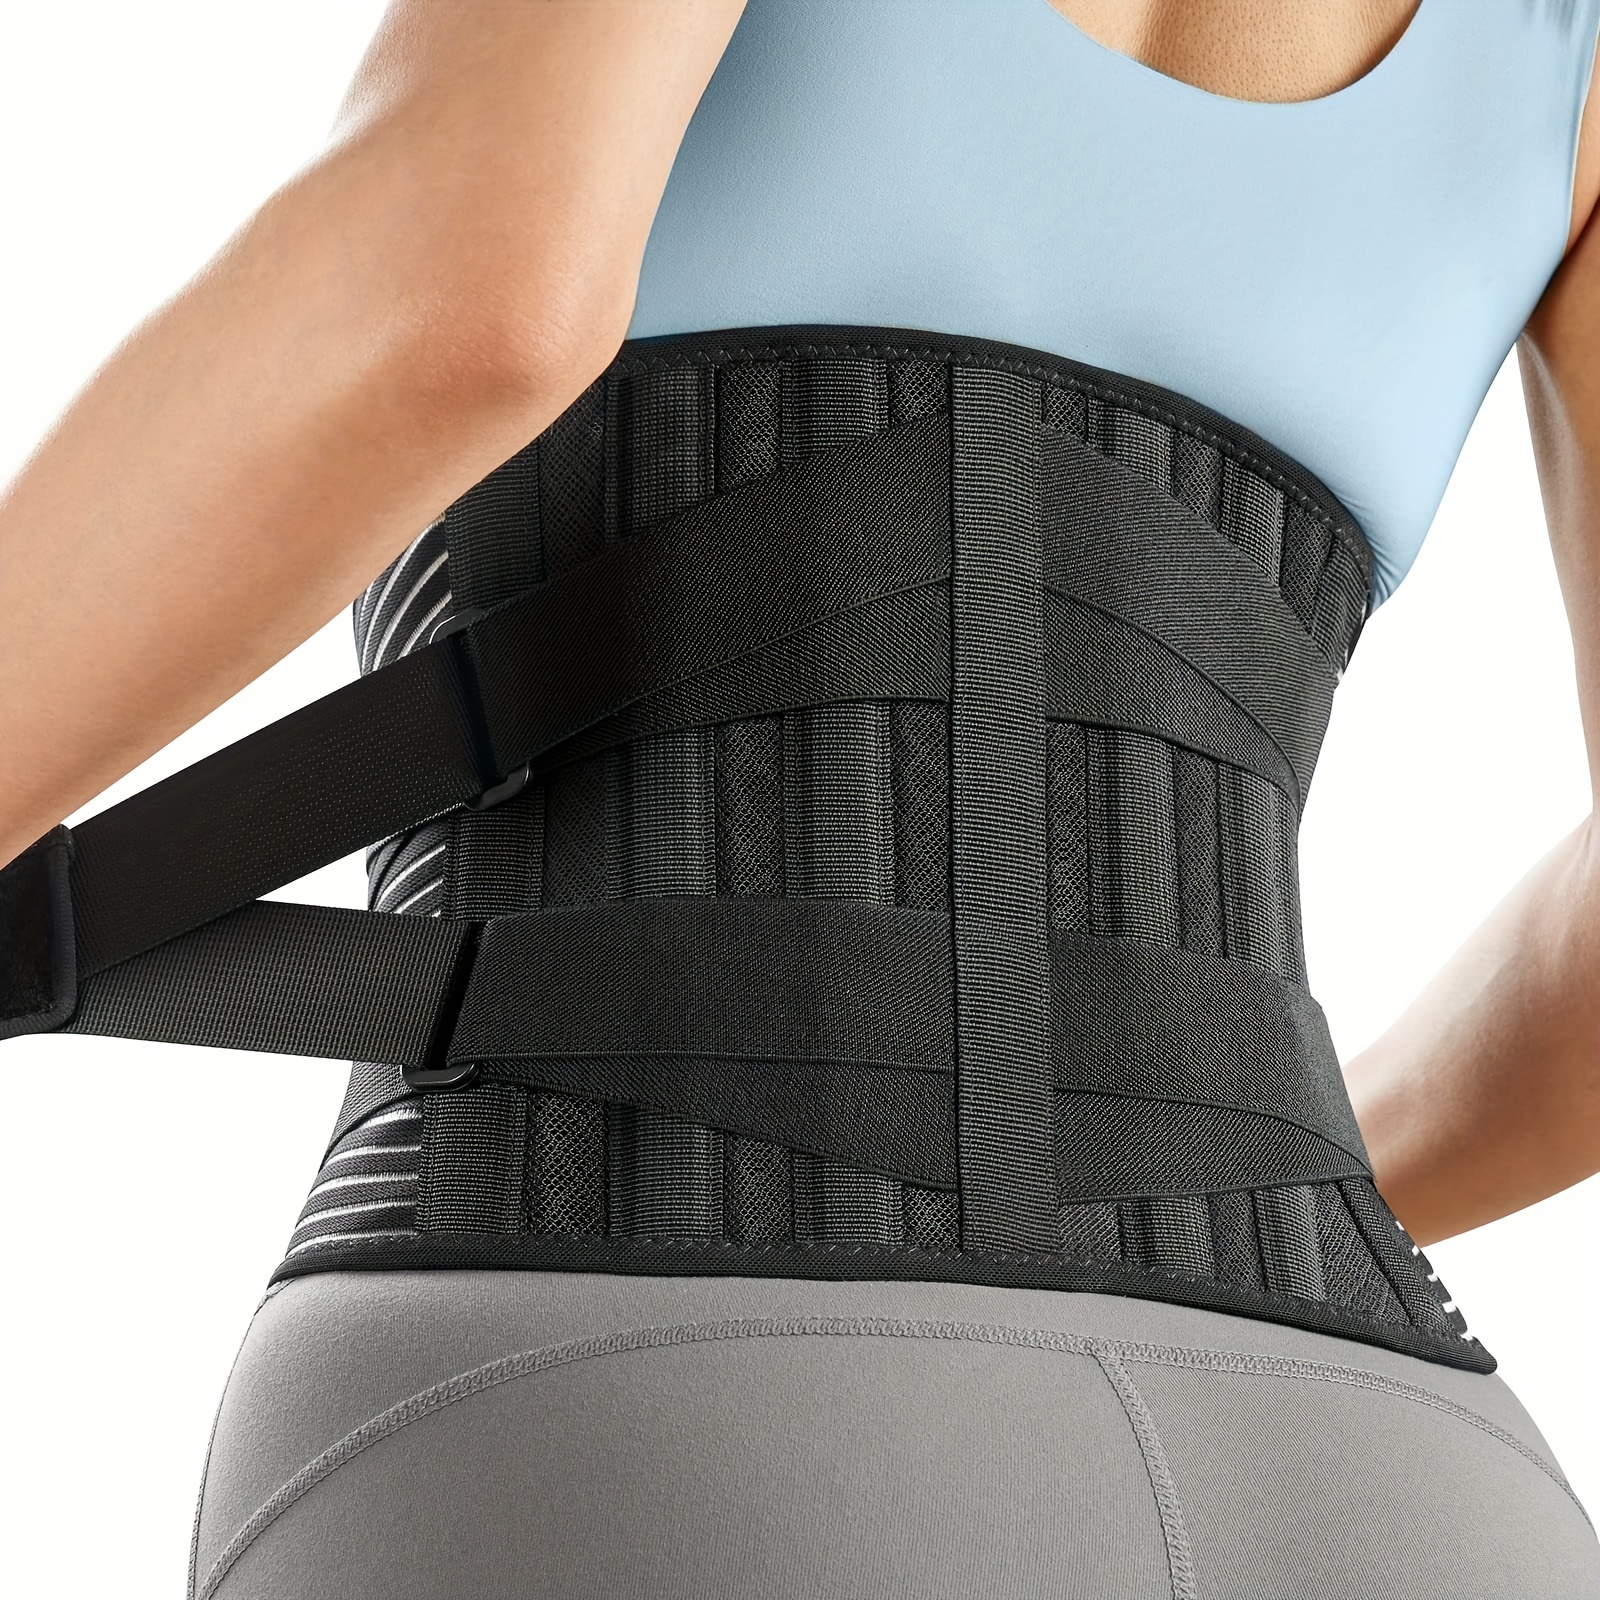  FREETOO Back Braces for Lower Back Pain Relief with 6